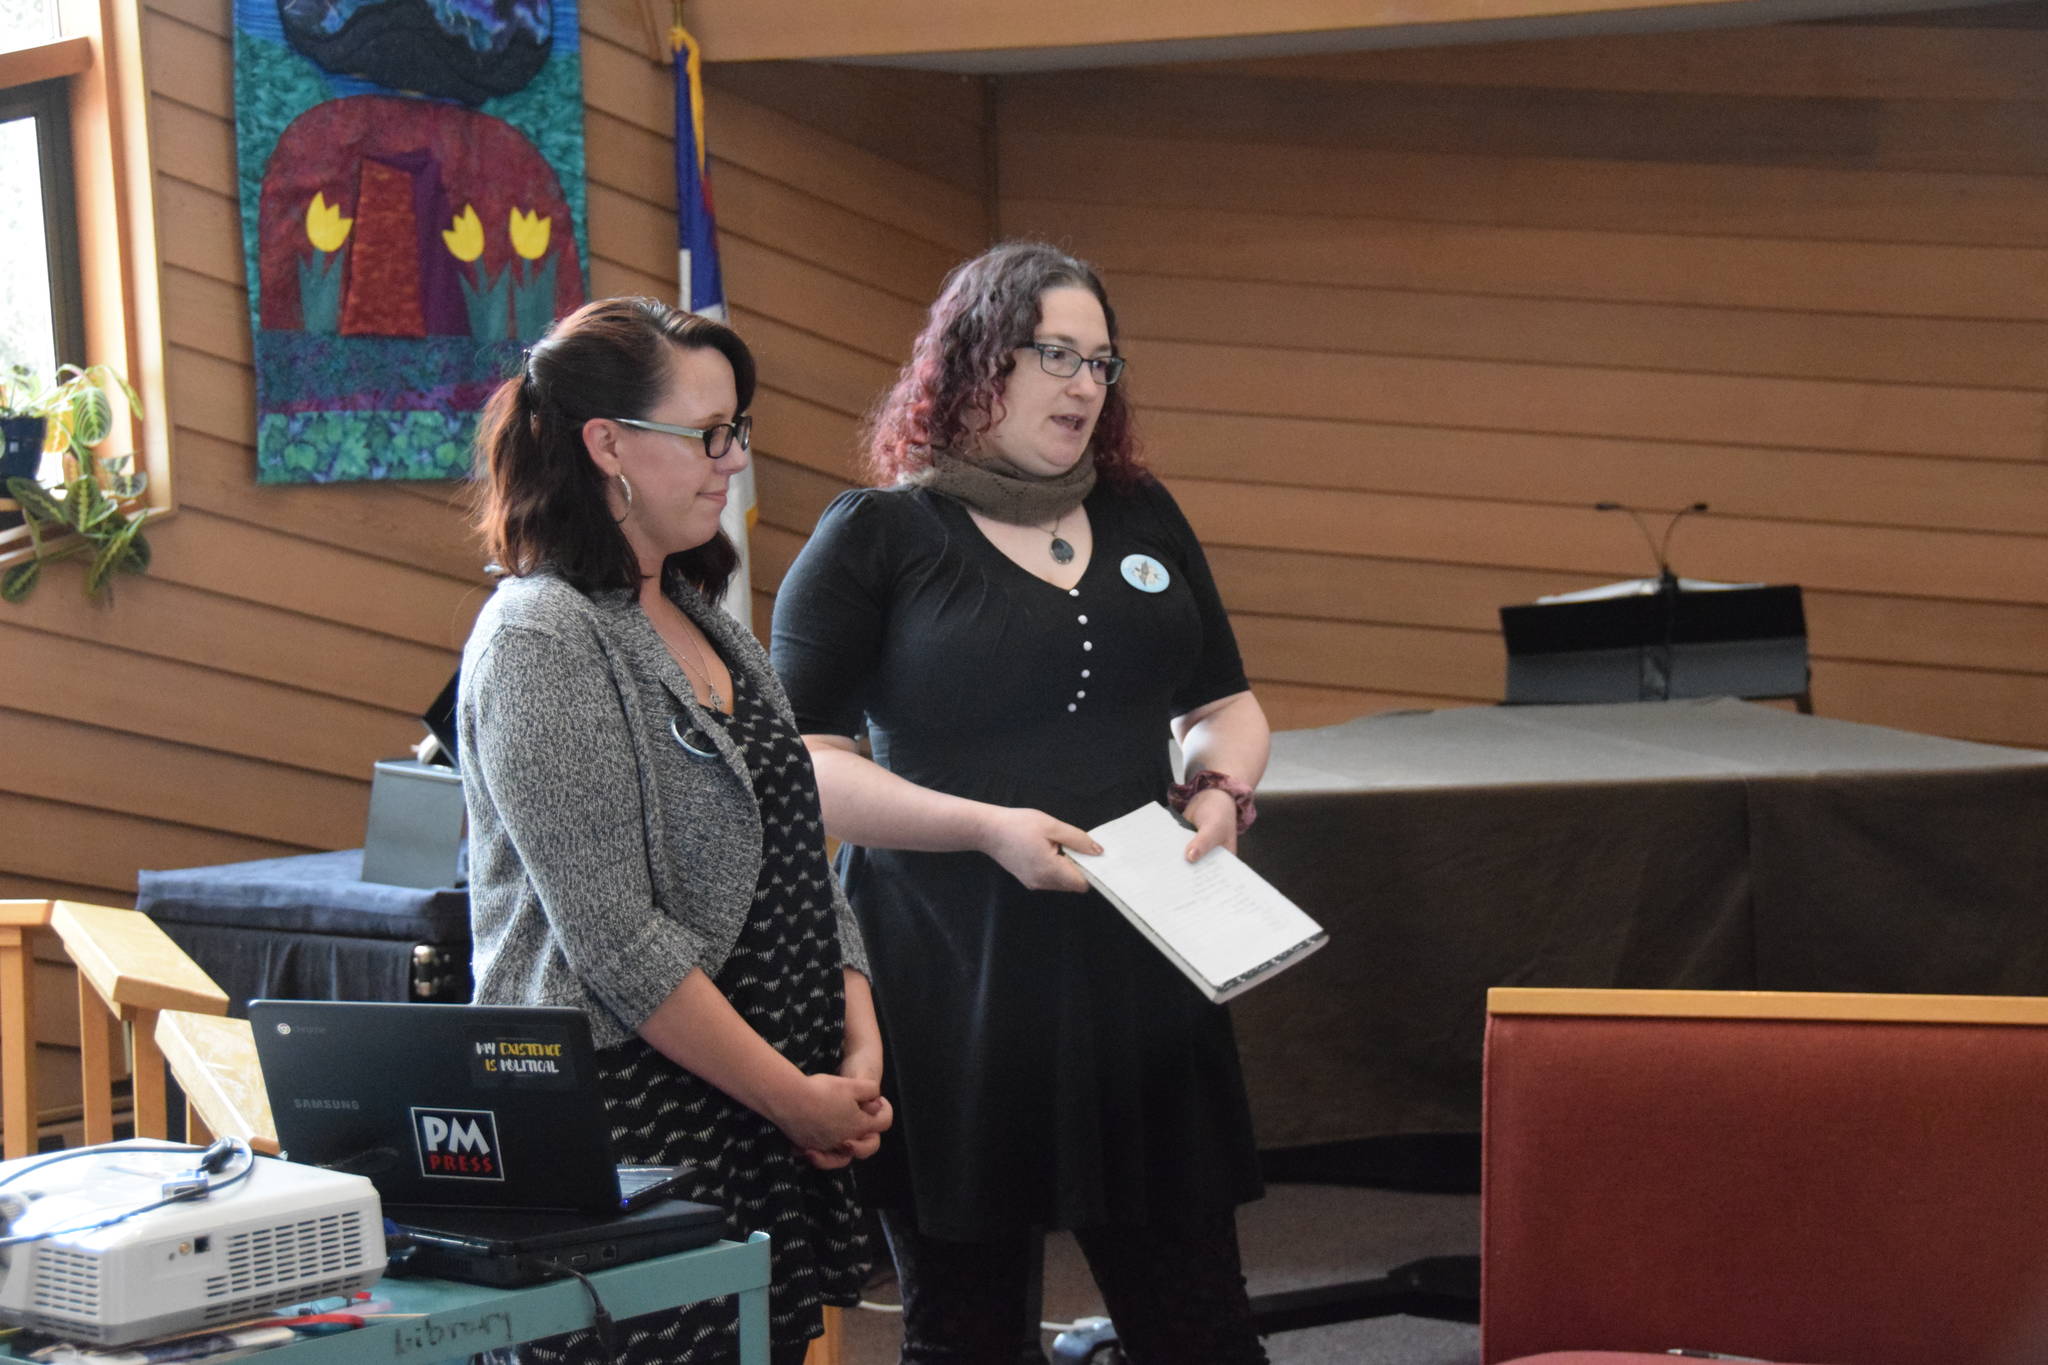 Amber Batts (left) and Terra Burns (right) speak to residents on behalf of CUSP at the Christ Lutheran Church in Soldotna on March 11, 2019. (Photo by Brian Mazurek/Peninsula Clarion)